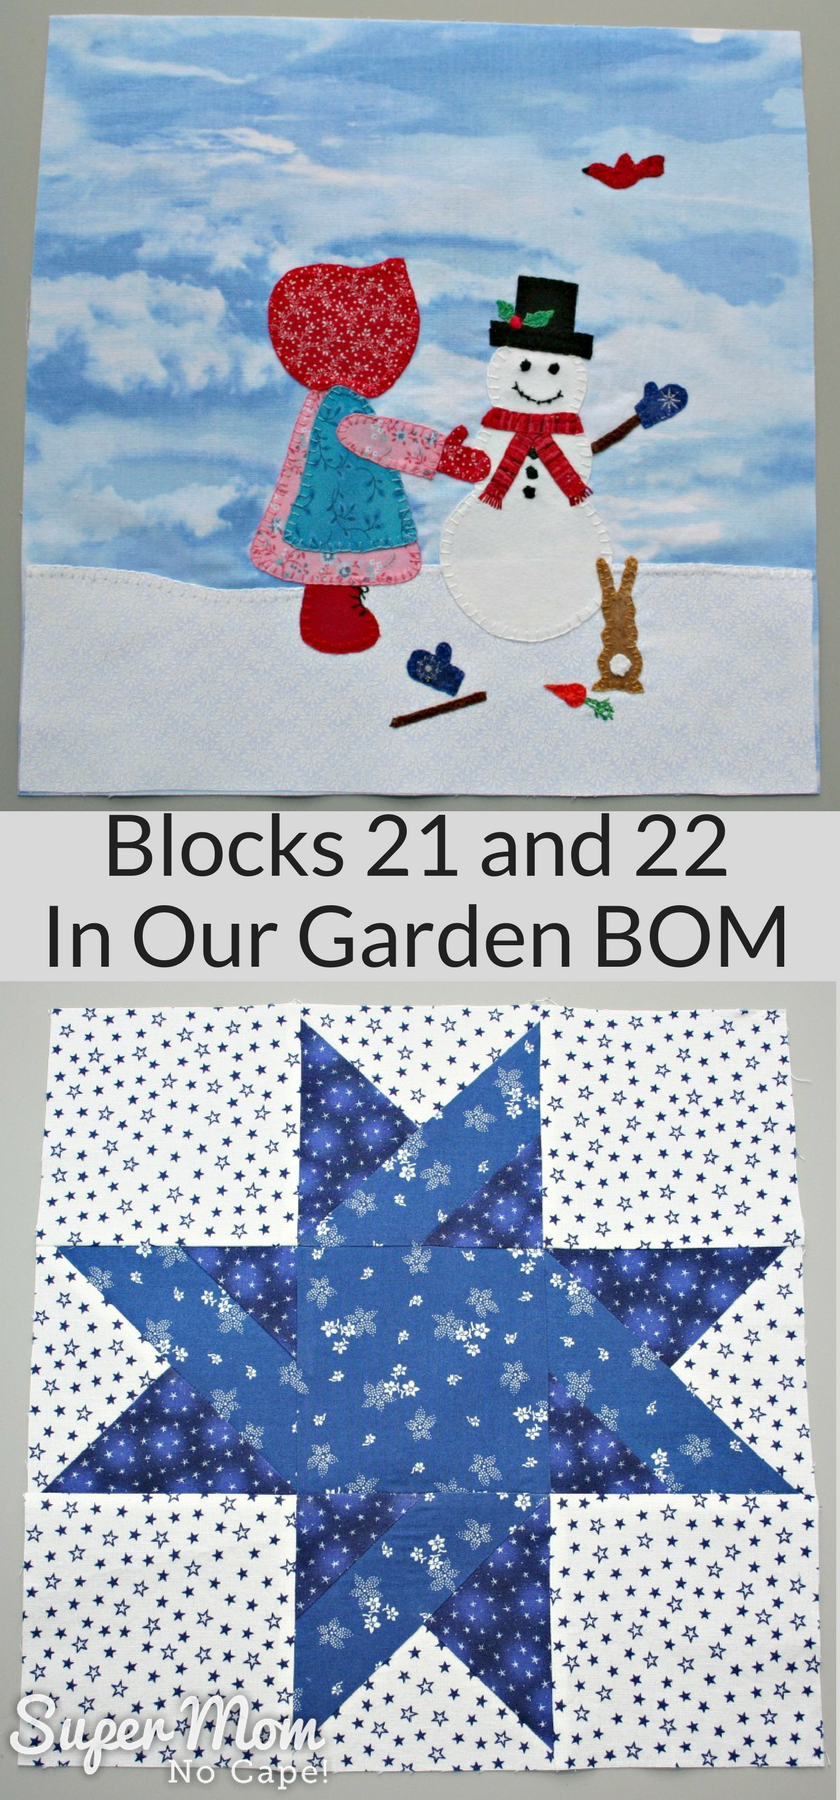 Blocks 21 and 22 - In Our Garden BOM 2016